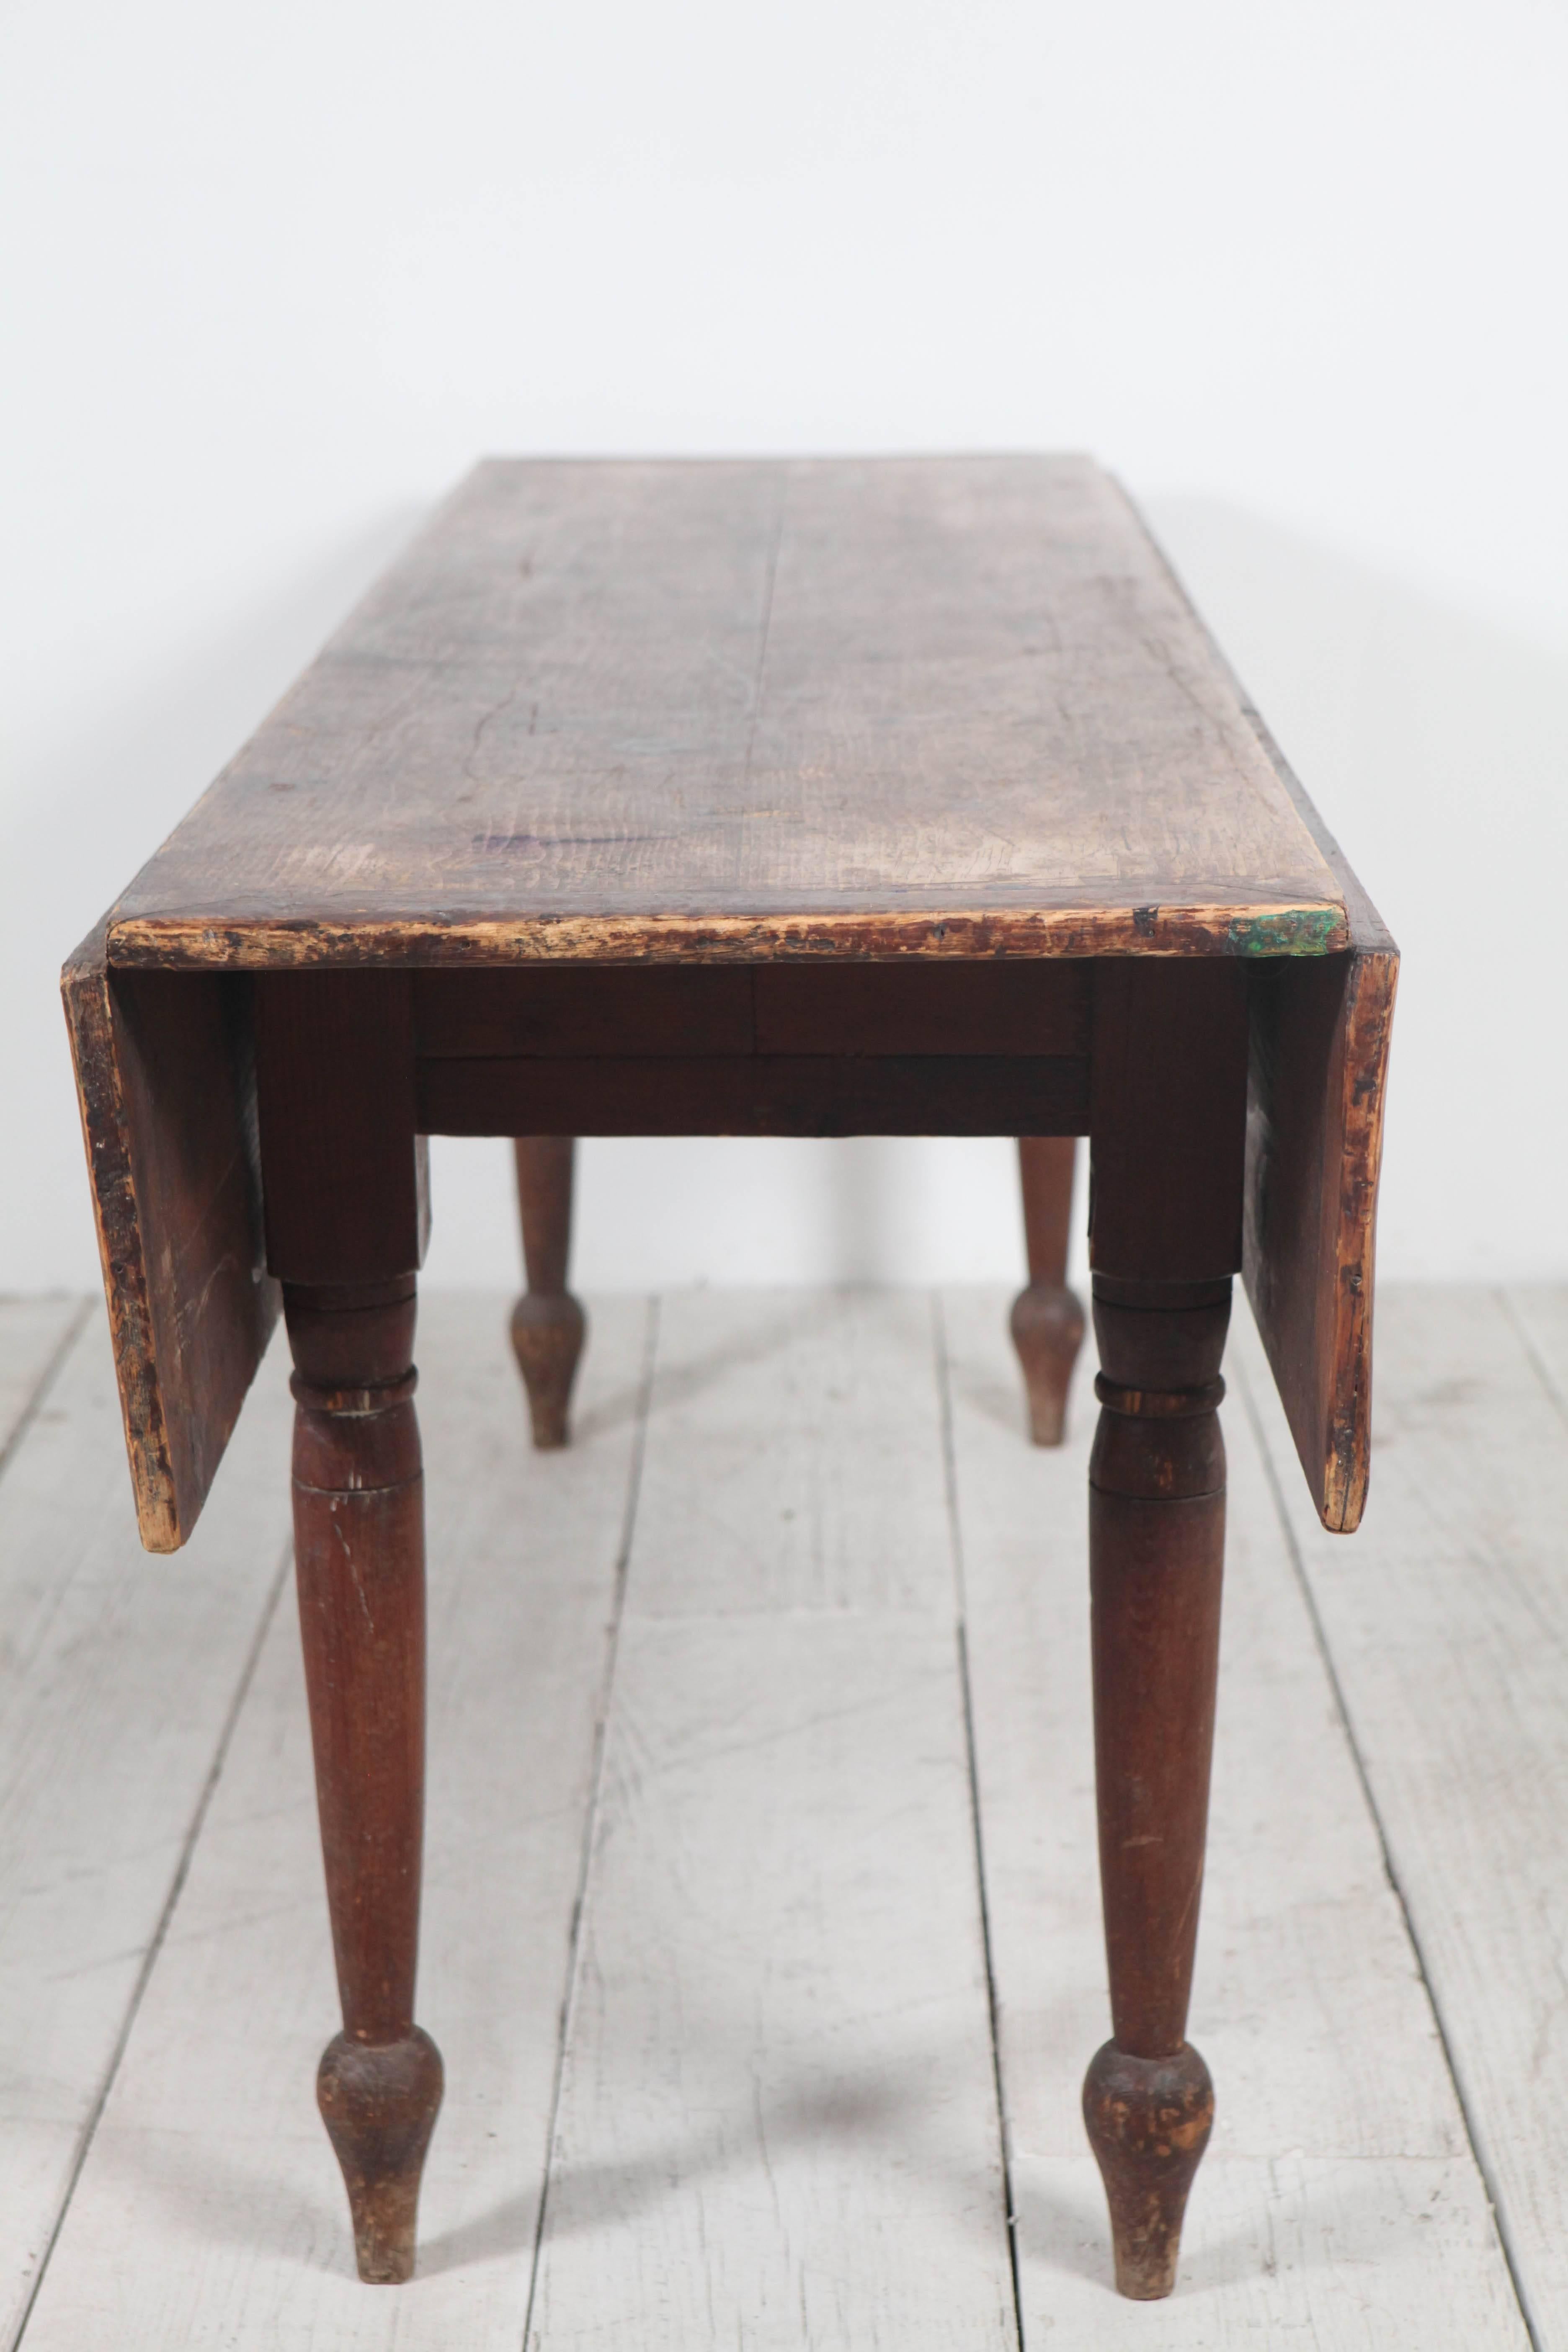 Rustic Drop-Leaf Wooden Table with Turned Legs 1